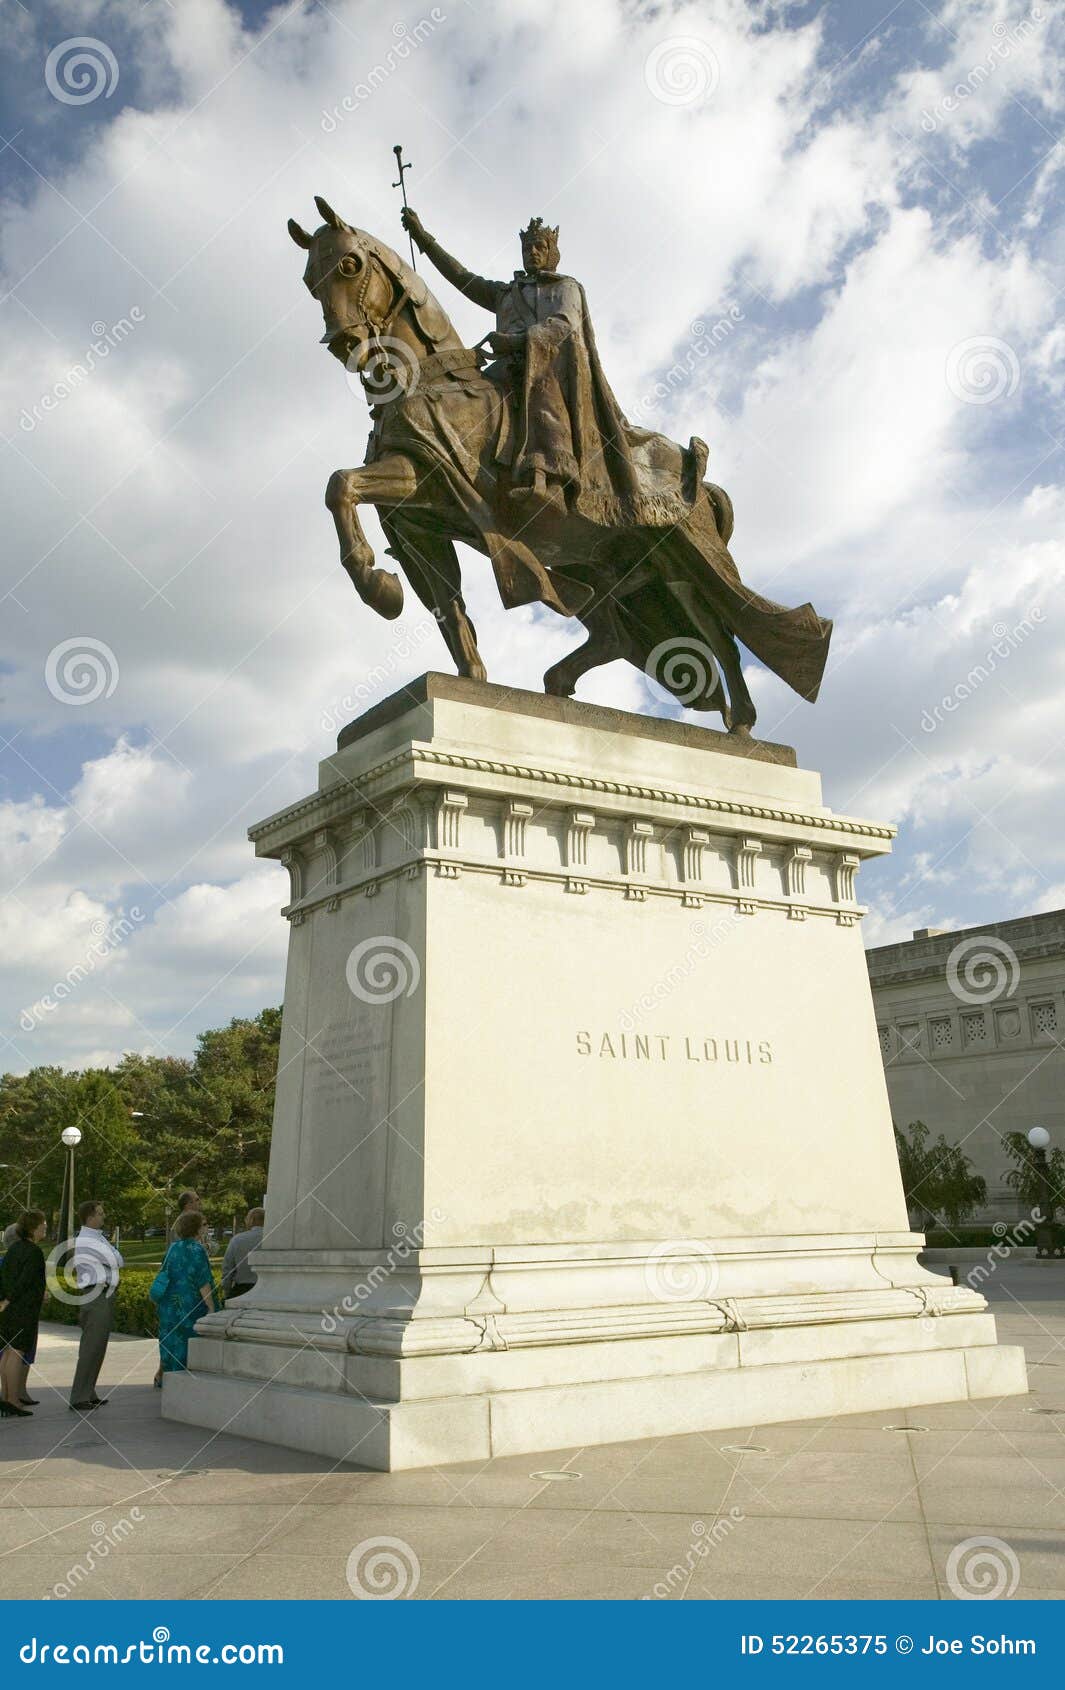 Crusader King Louis IX Statue In Front Of The Saint Louis Art Museum In Forest Park, St. Louis ...